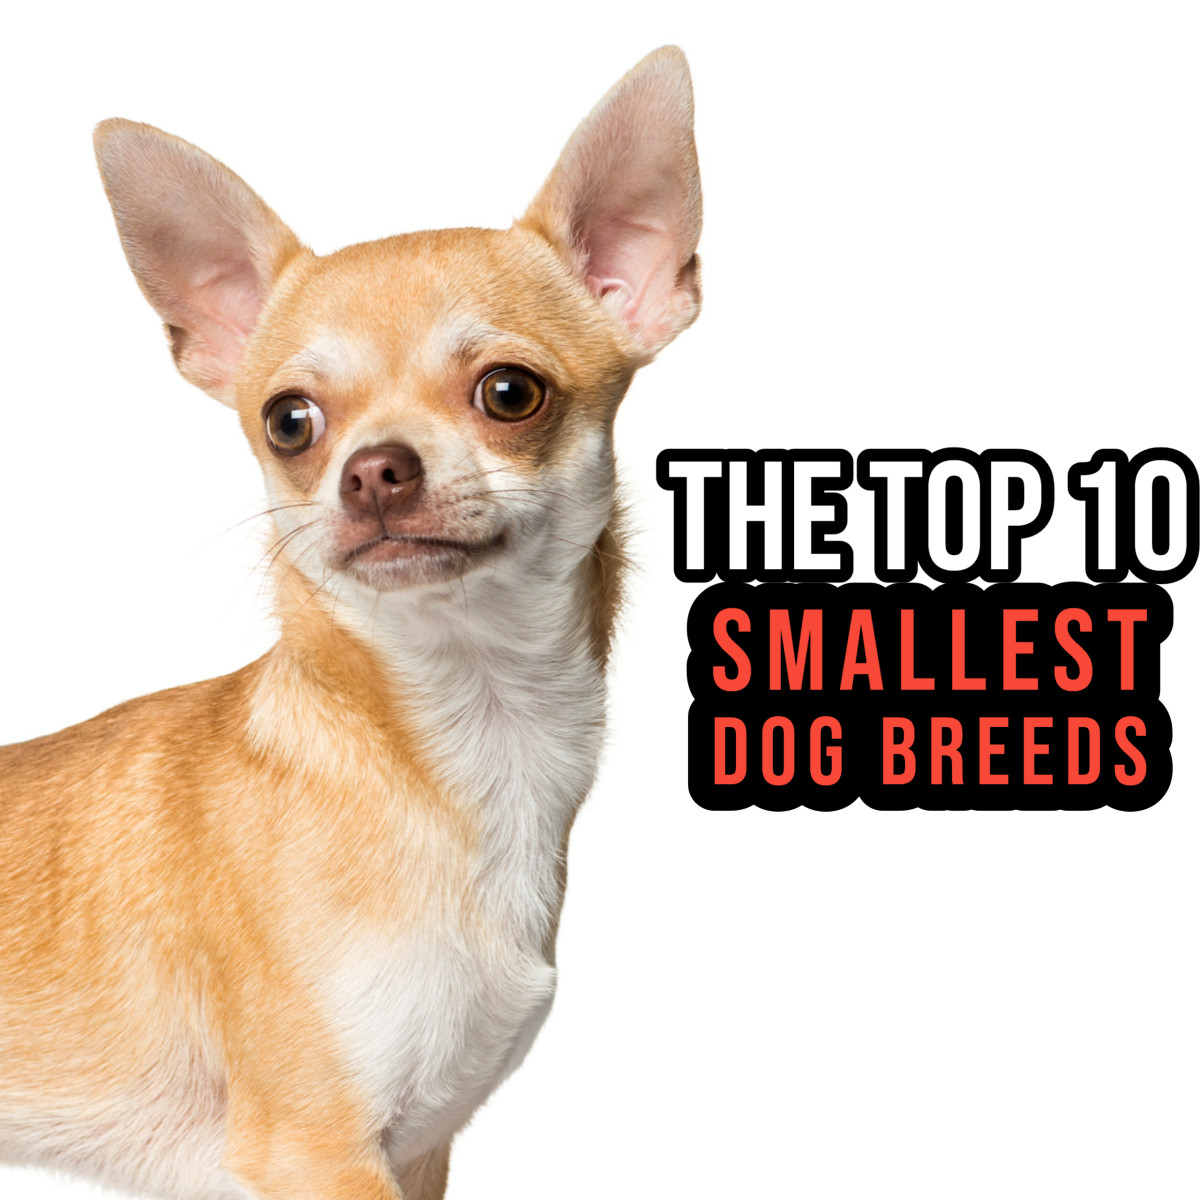 From the Pug to the Chihuahua, this article ranks the 10 smallest dog breeds!